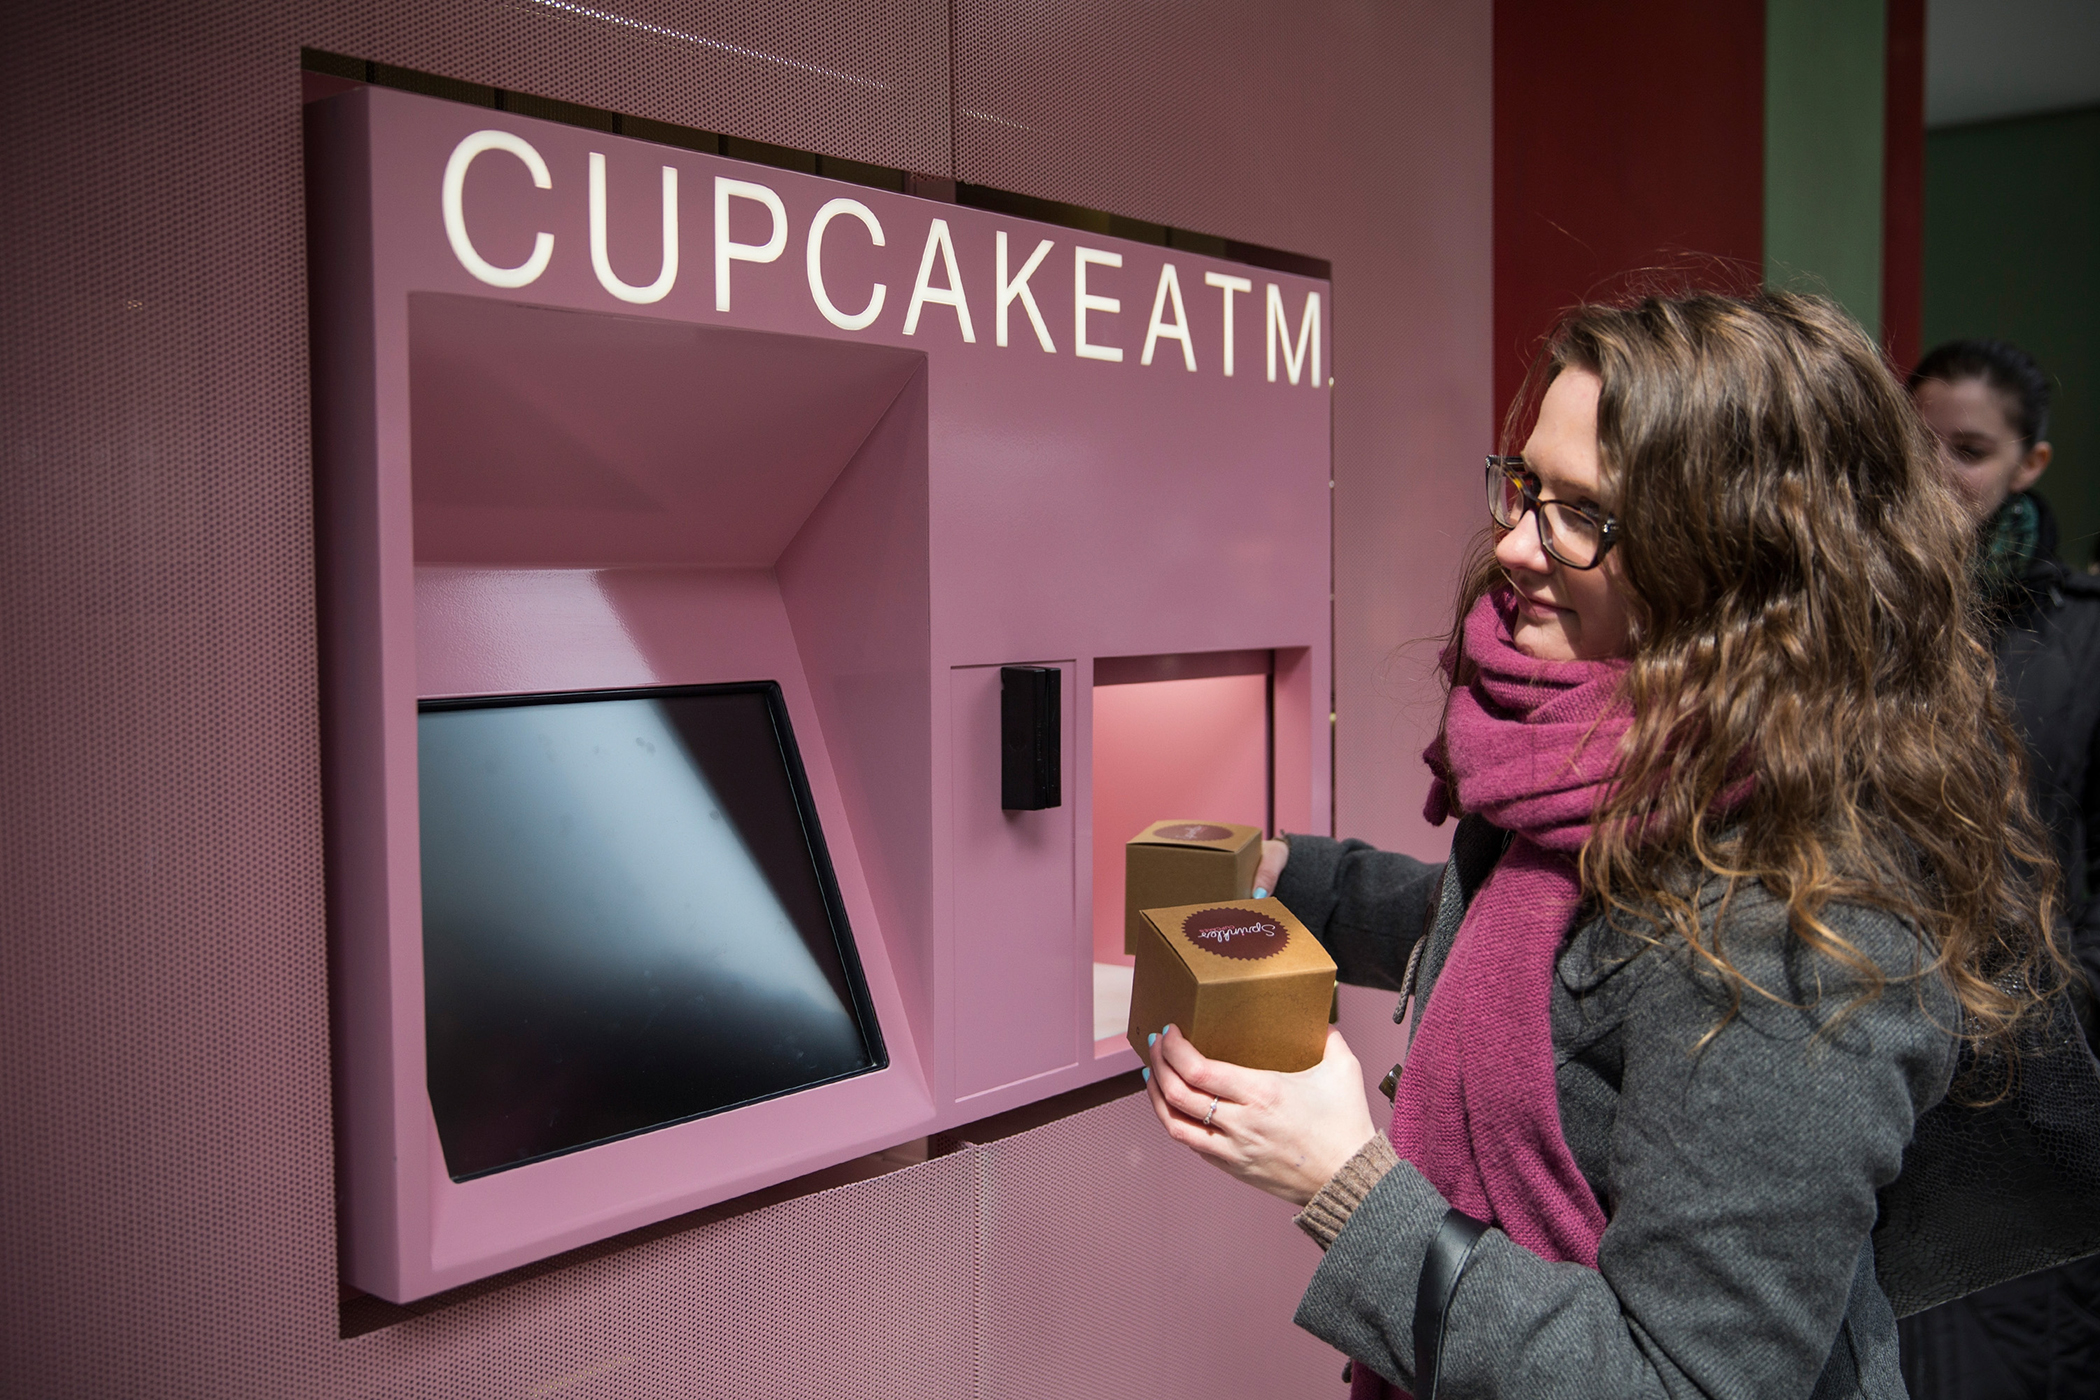 13 Unexpected Things You Can Buy From Vending Machines